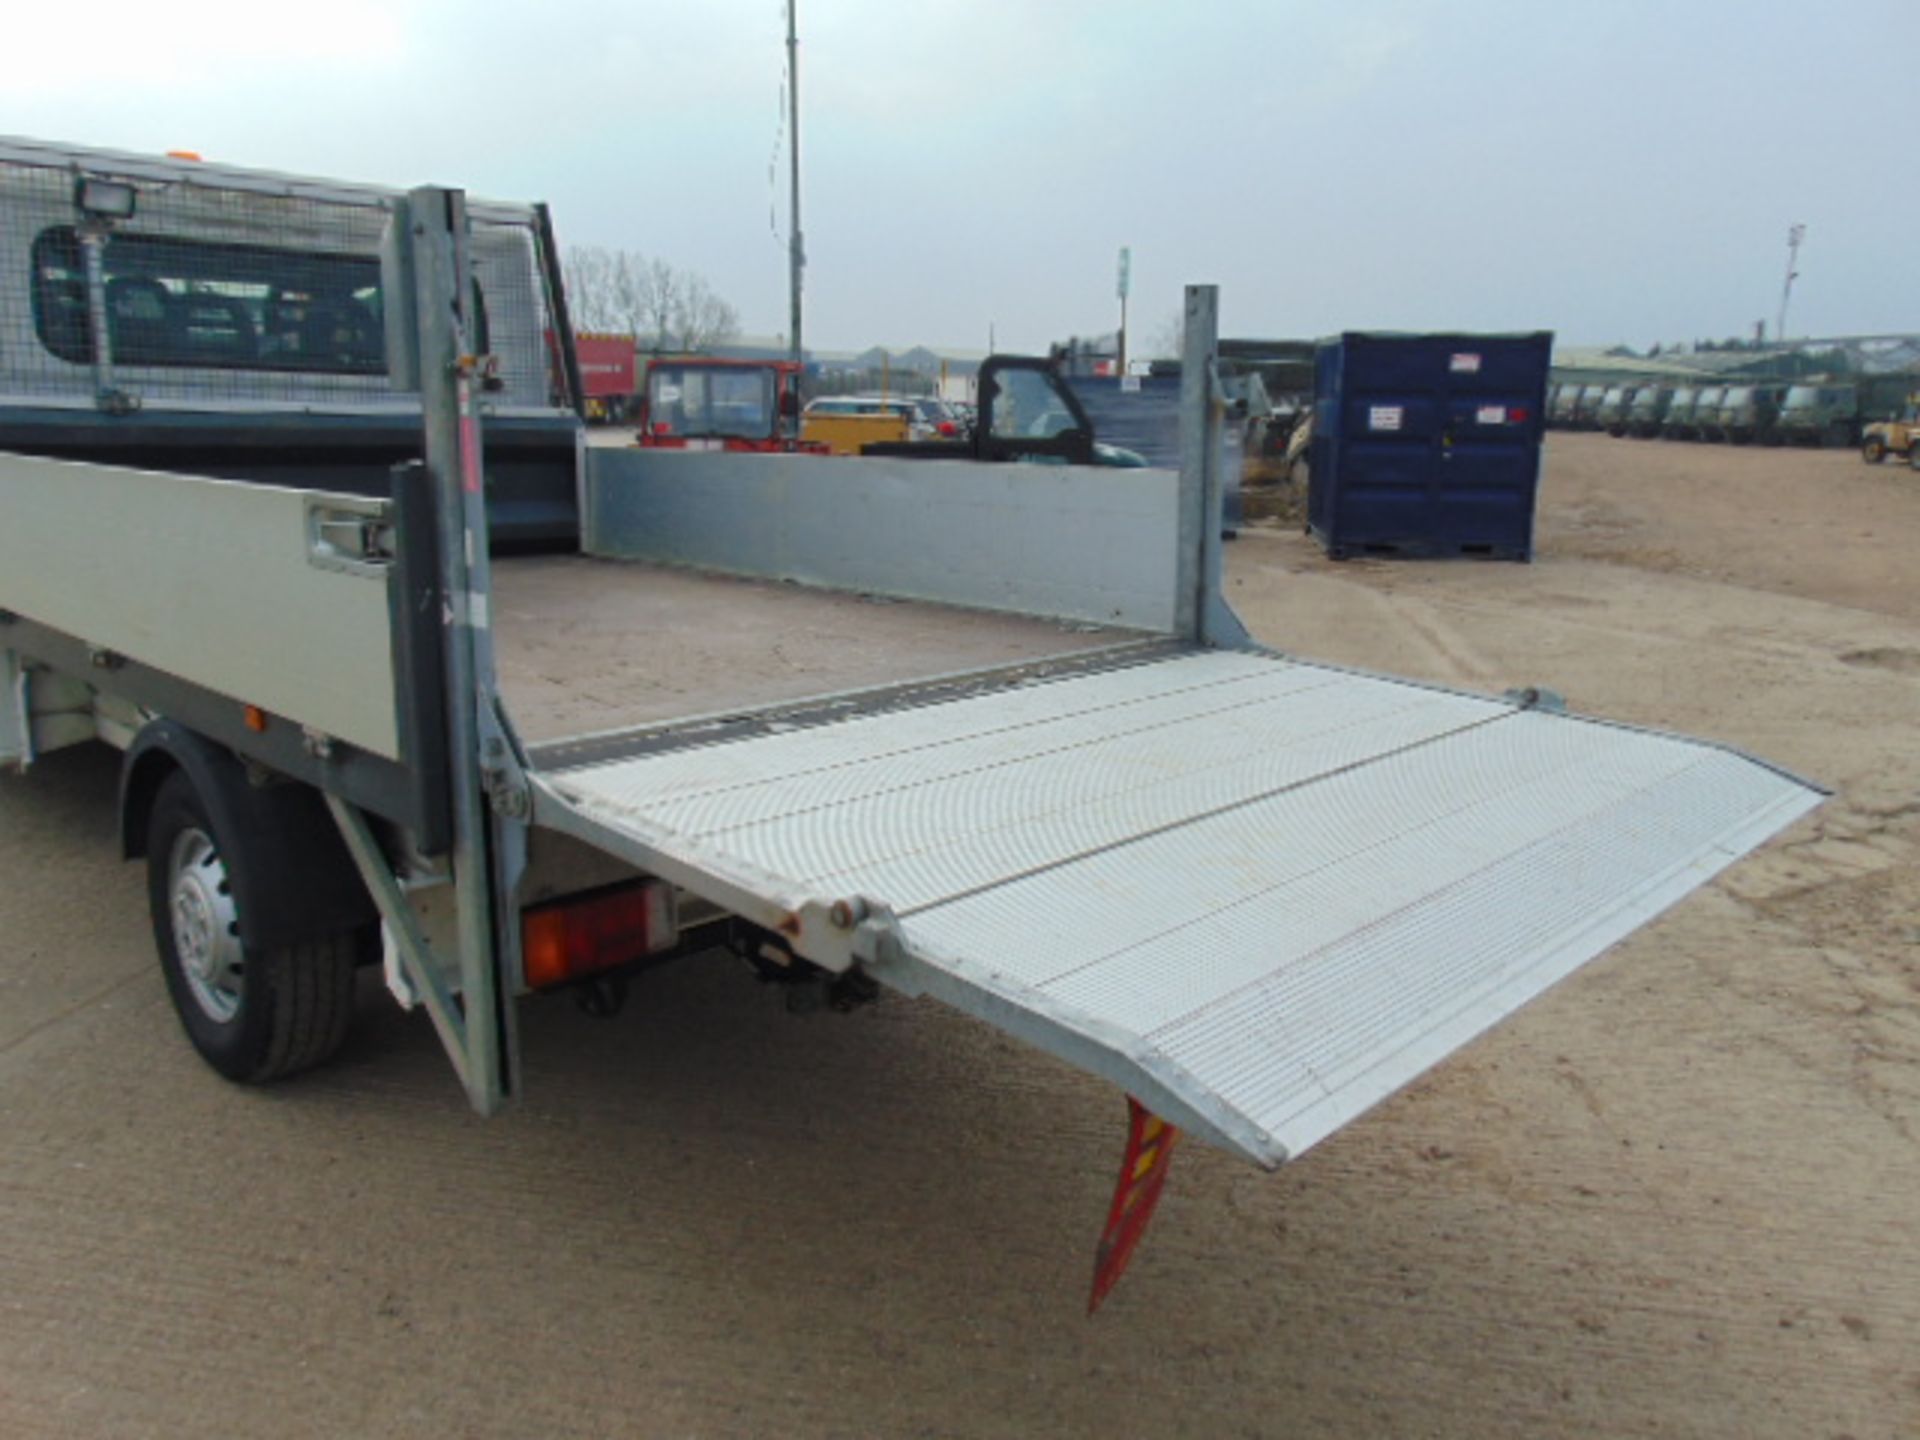 Citroen Relay 7 Seater Double Cab Dropside Pickup with 500kg Ratcliff Palfinger Tail Lift - Image 18 of 27